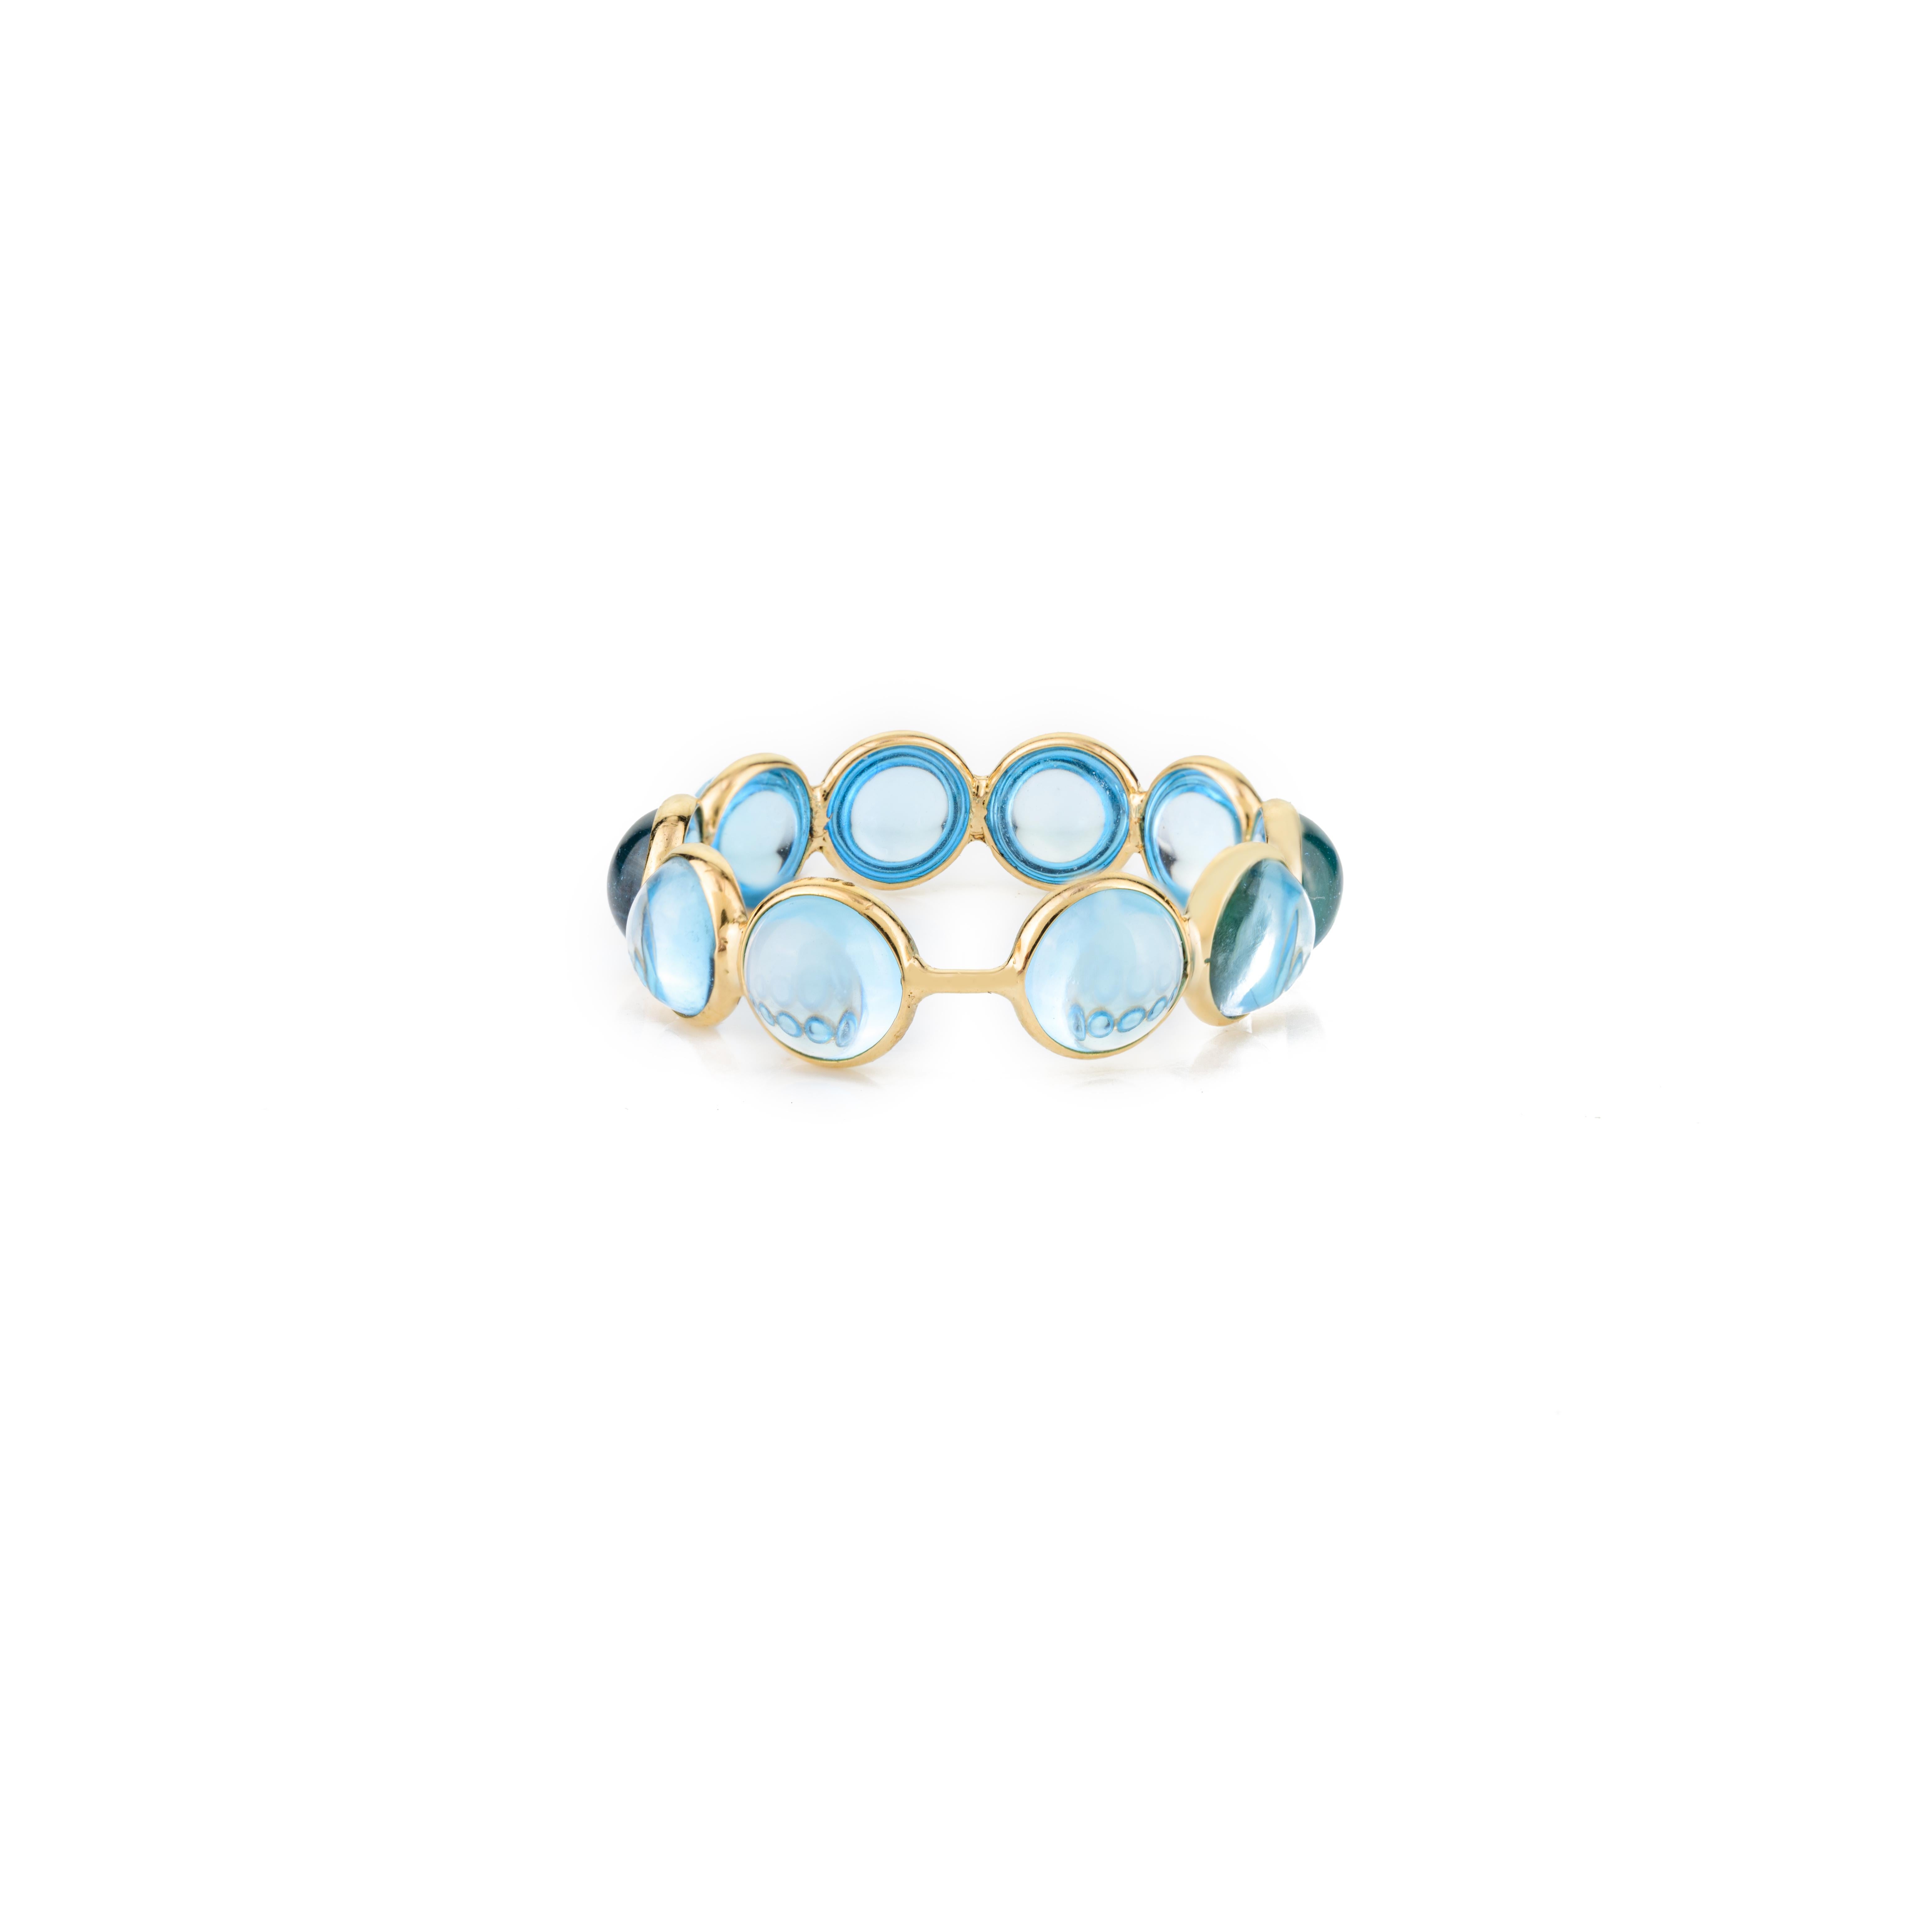 For Sale:  Round Cabochon Blue Topaz Eternity Band Ring Gift in 18k Solid Yellow Gold 5